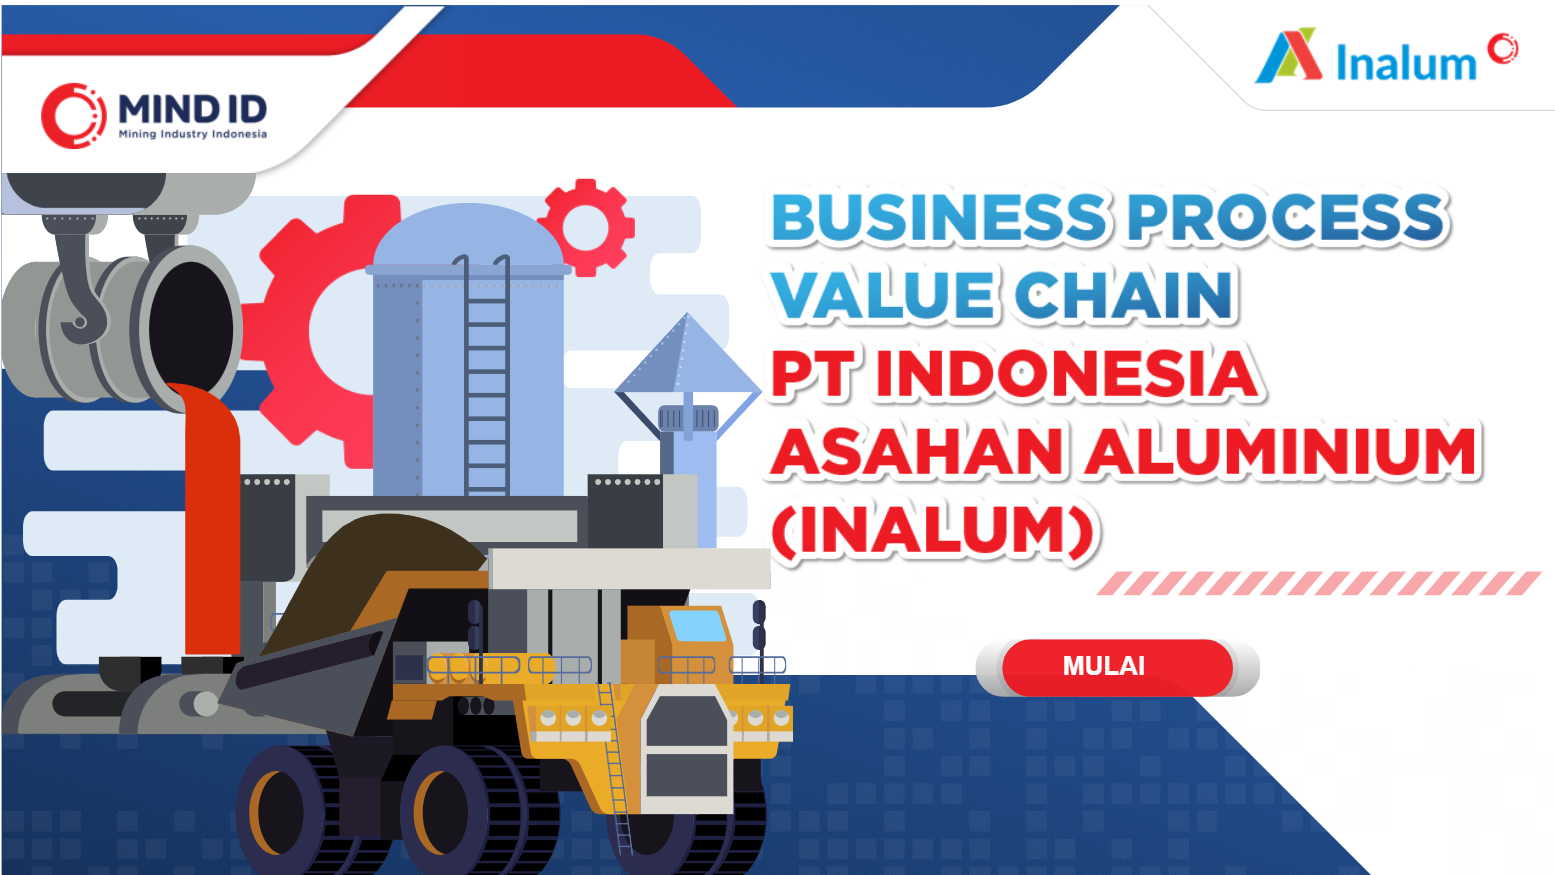 INALUM Business Process Value Chain